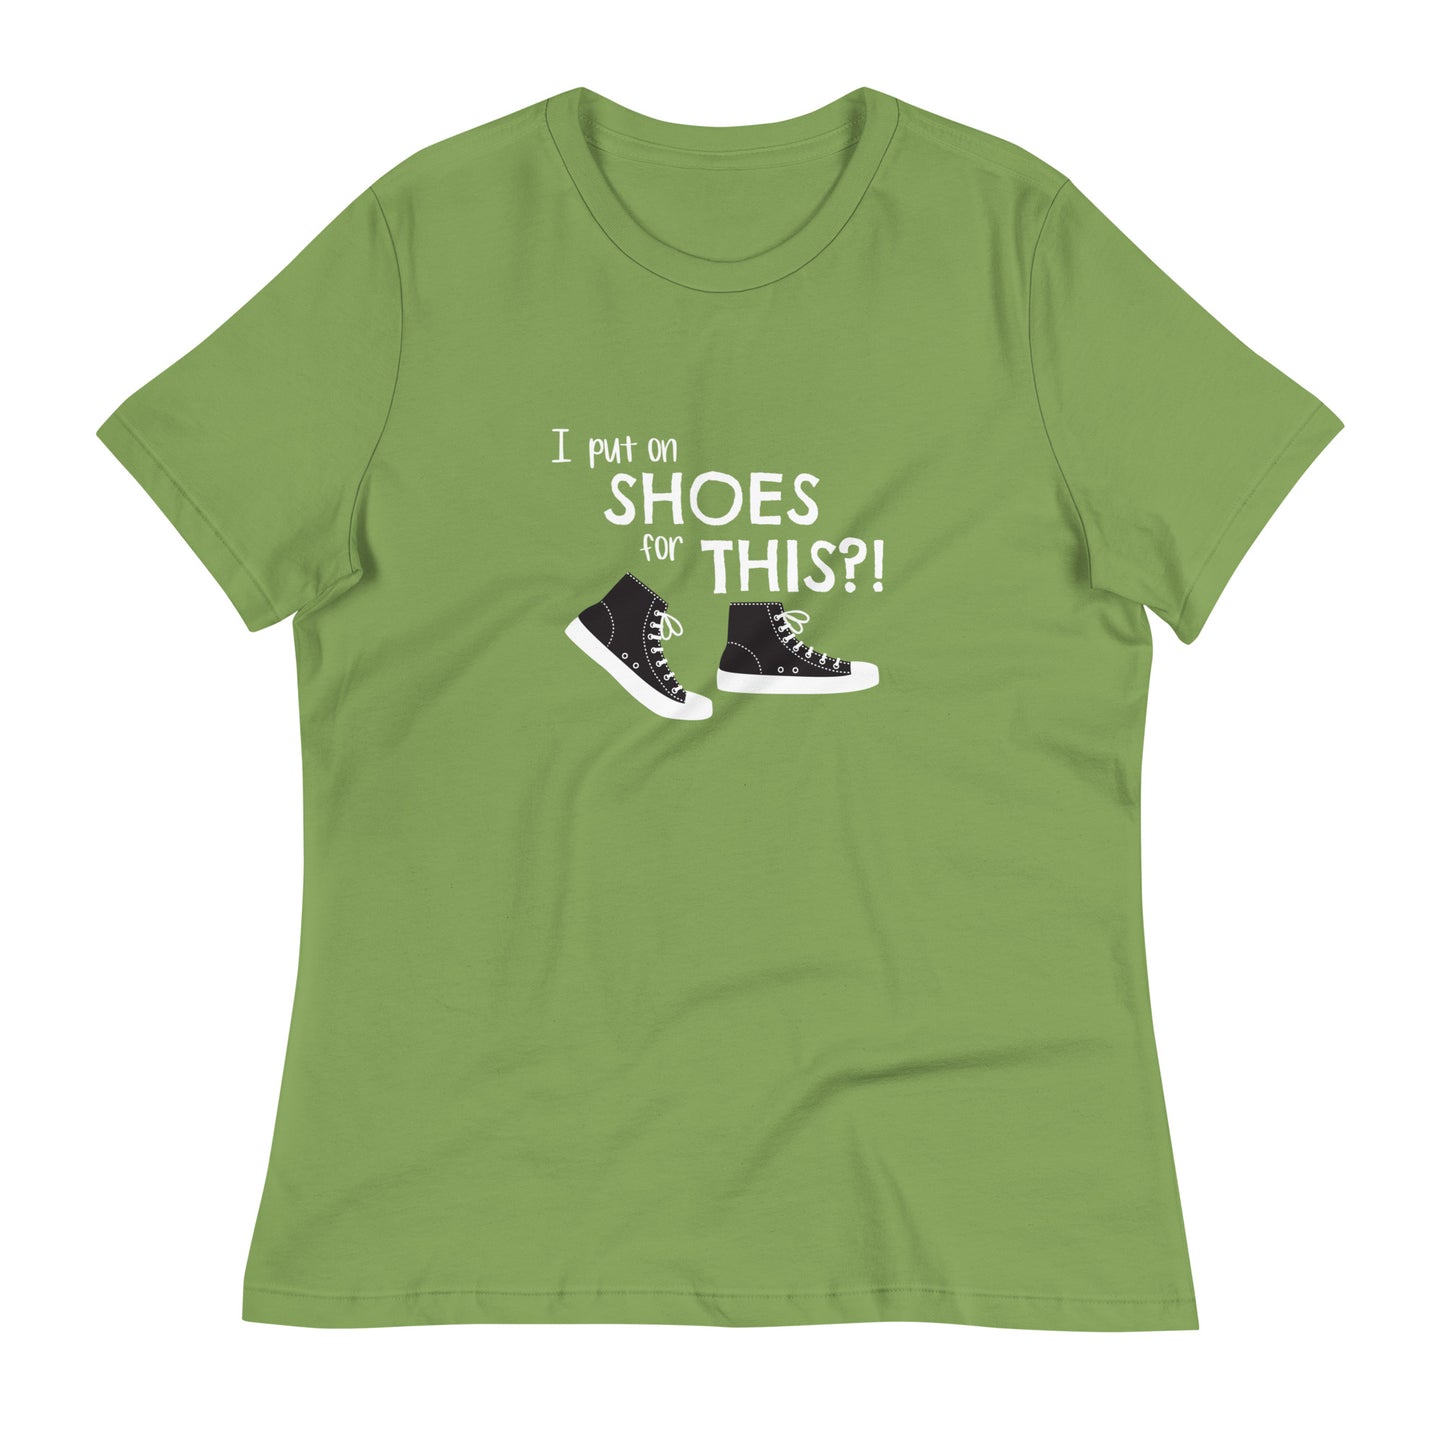 Leaf green women's relaxed fit t-shirt with graphic of black and white canvas "chuck" sneakers and text: "I put on SHOES for THIS?!"